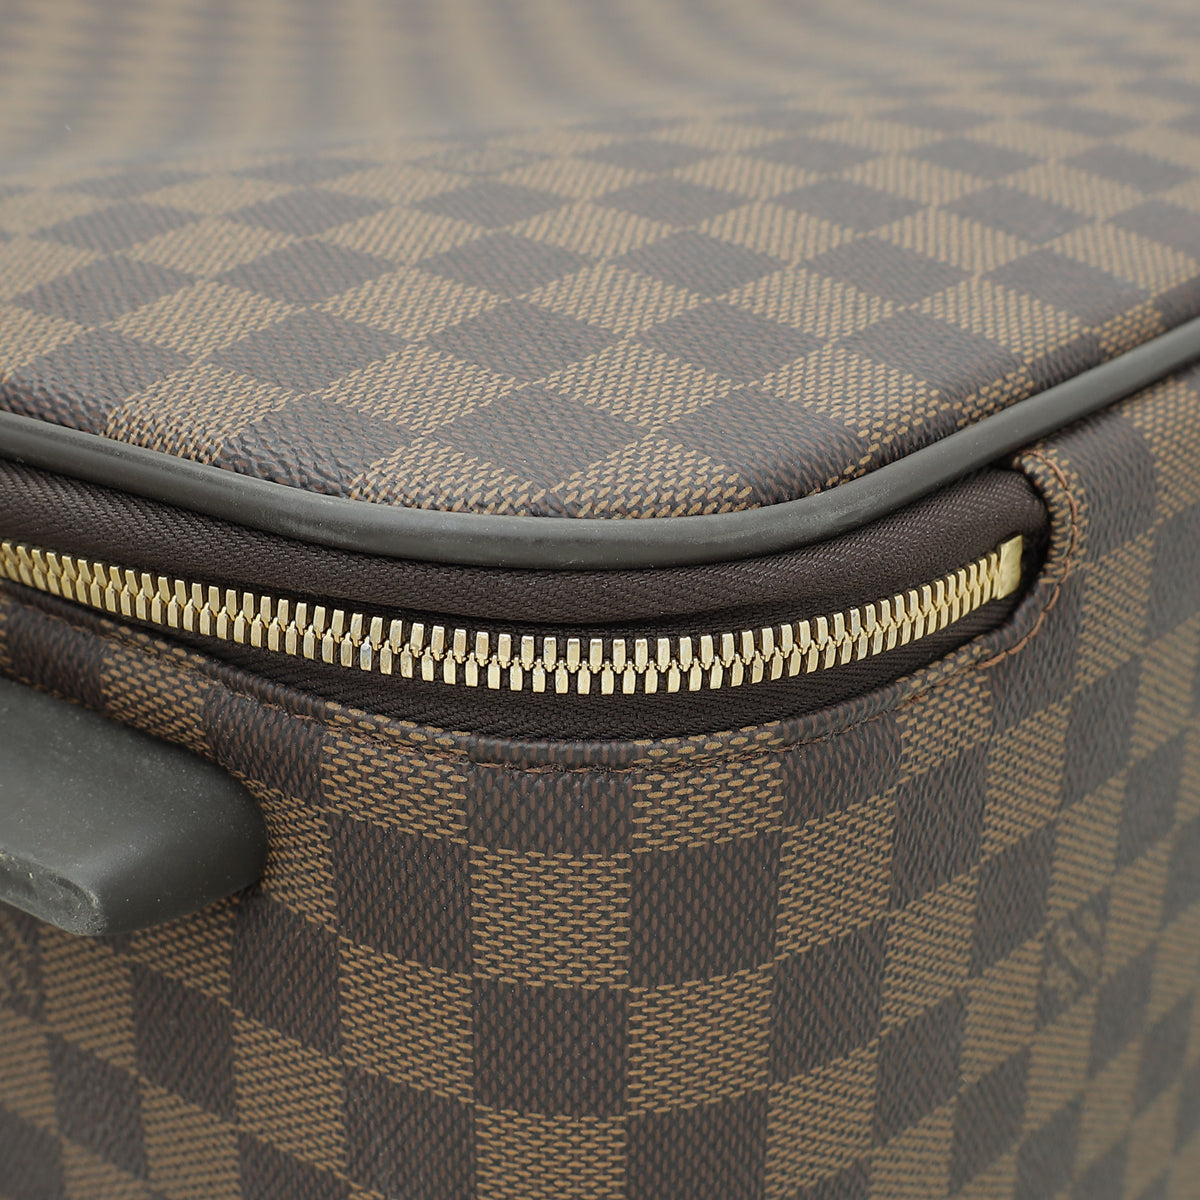 Louis Vuitton Damier Ebene Pegase #55 Carry On Luggage – Perry's Jewelry